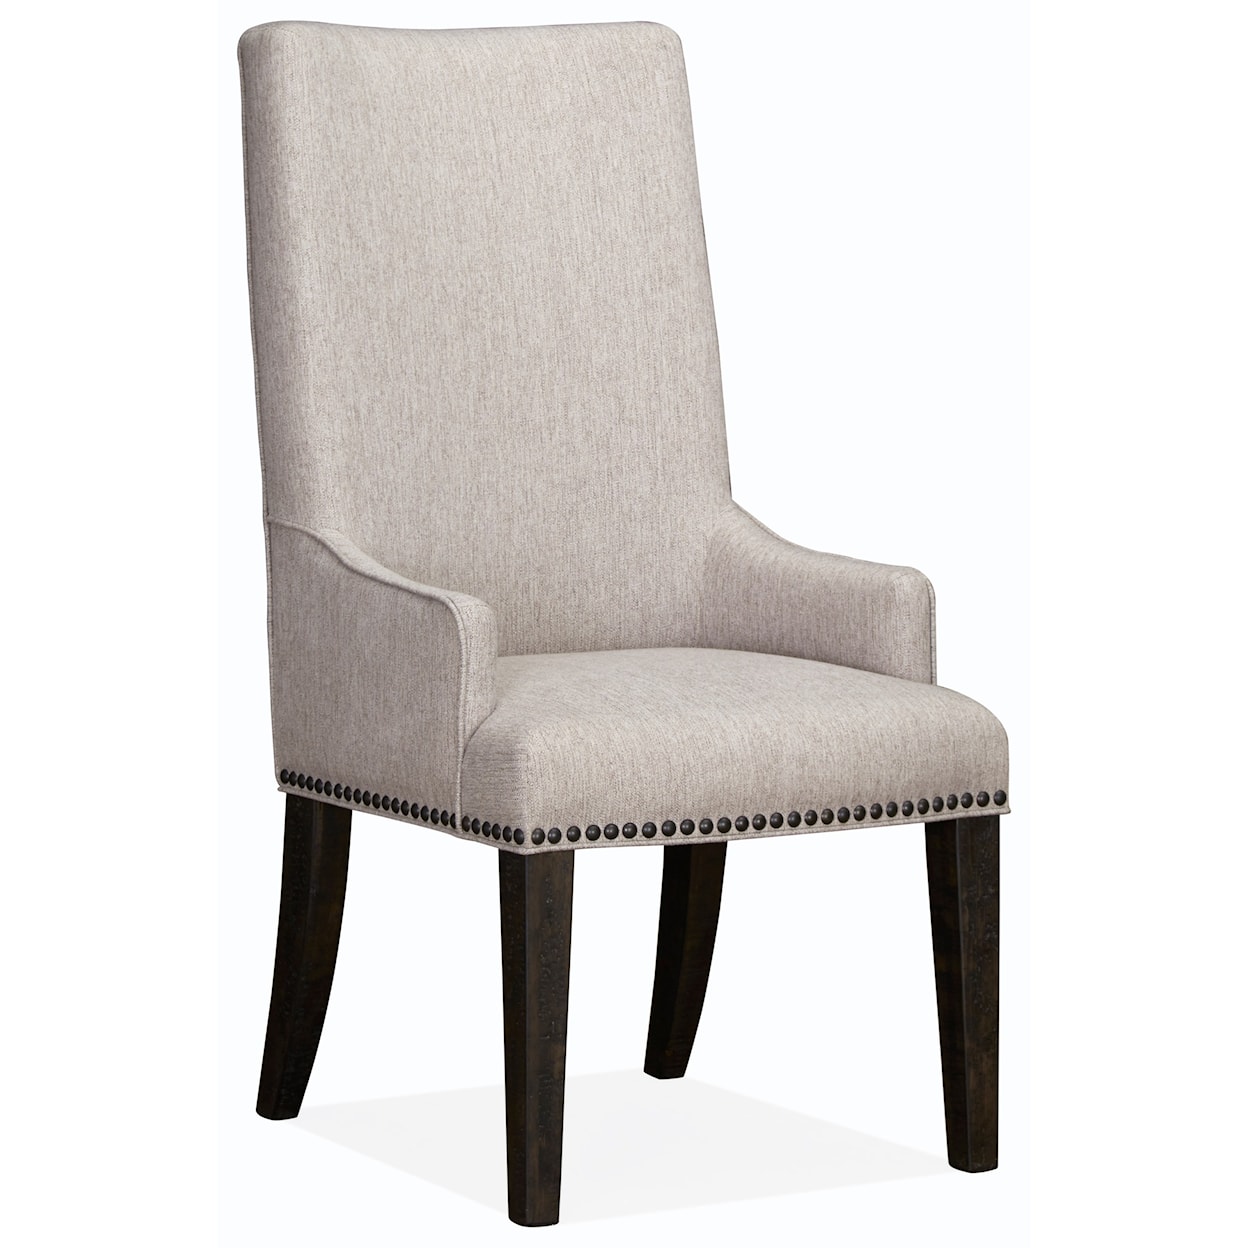 Magnussen Home Sloan Dining Host Chair